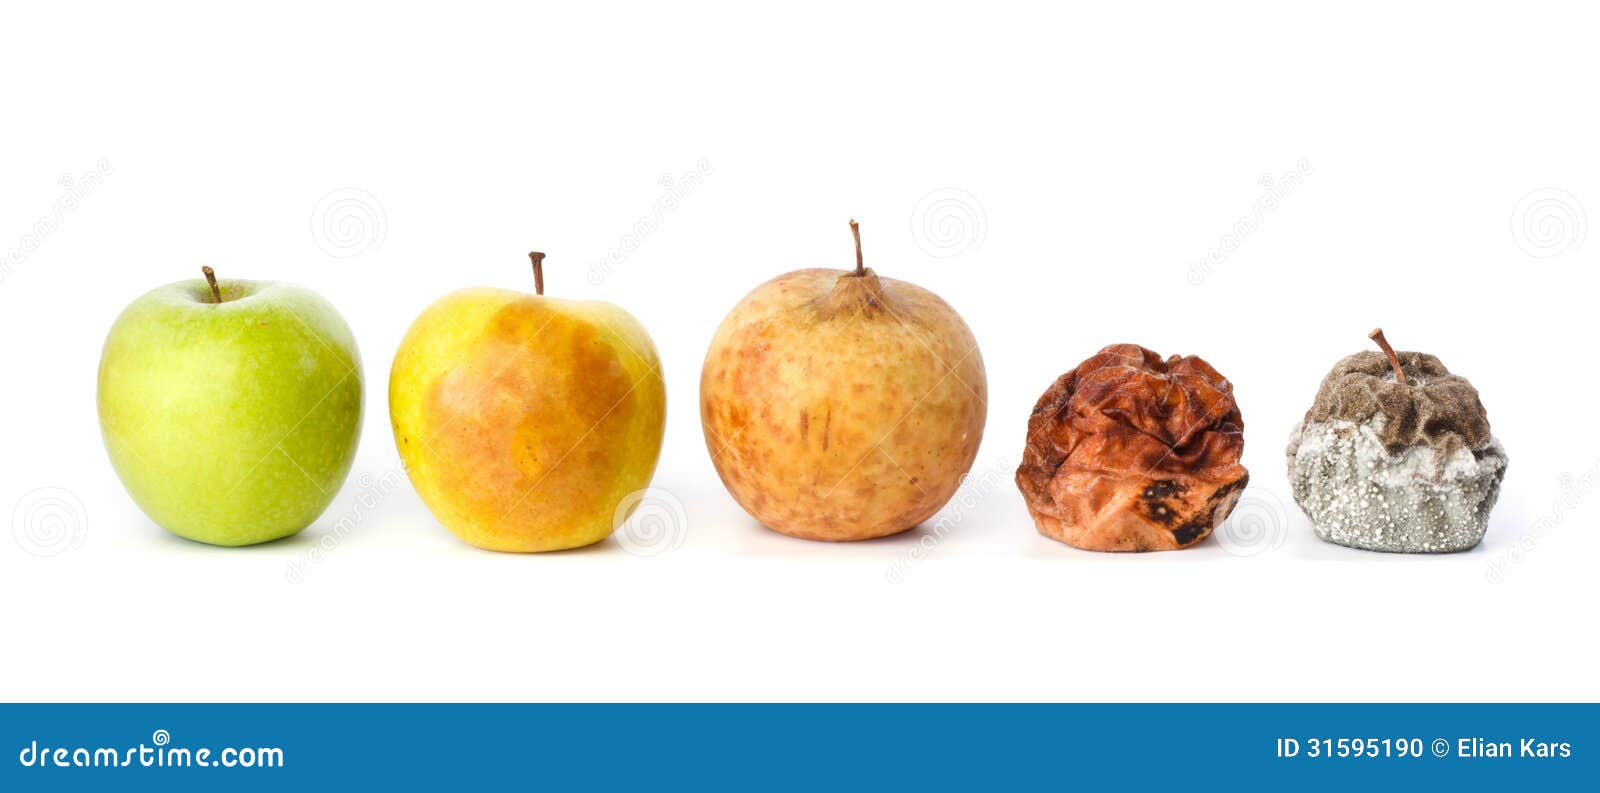 five apples in various states of decay